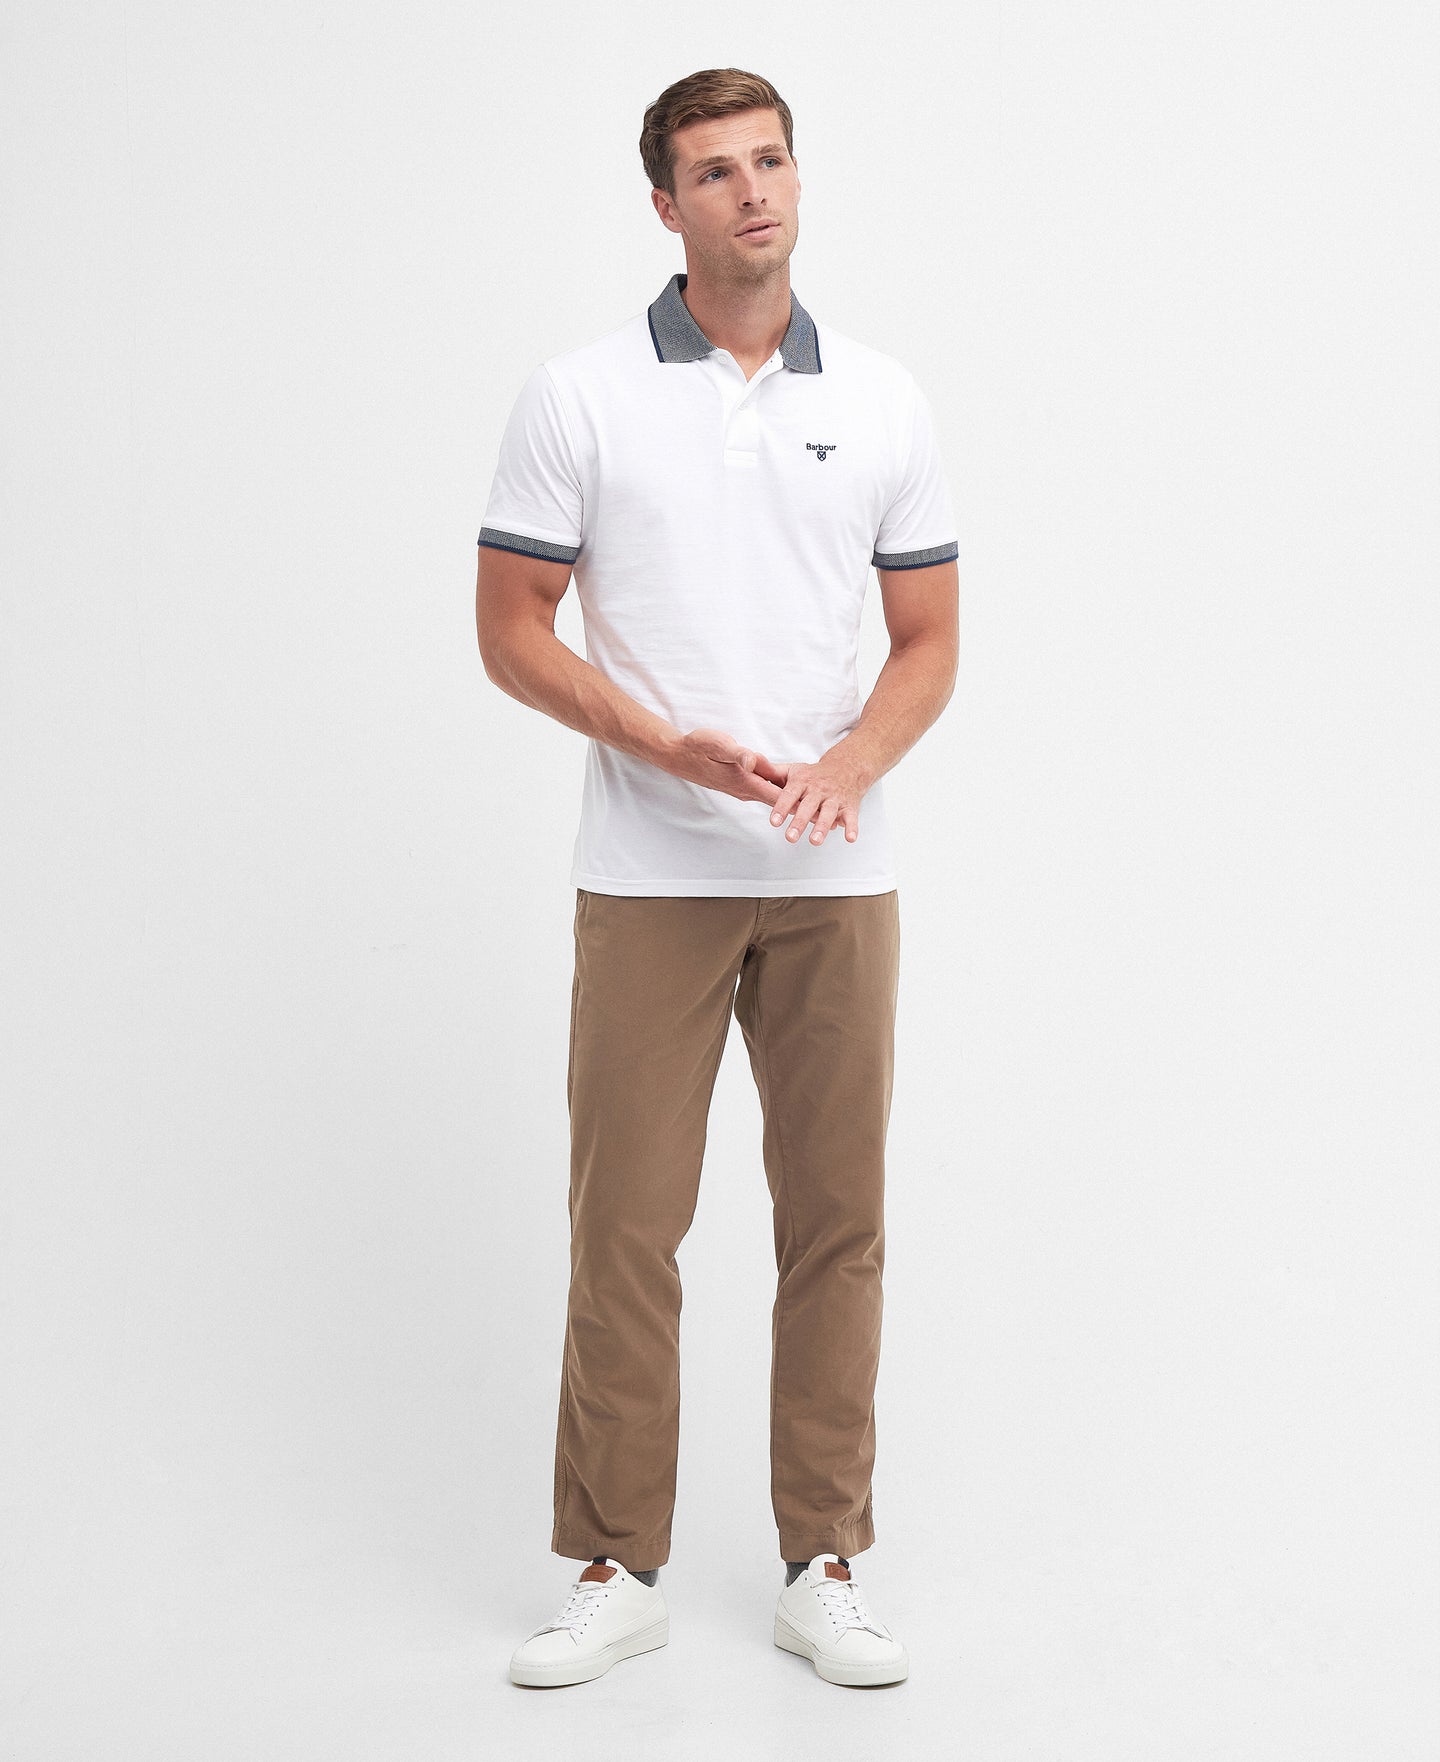 Barbour Mml1281wh11 Barbour Cornsay Polo   White